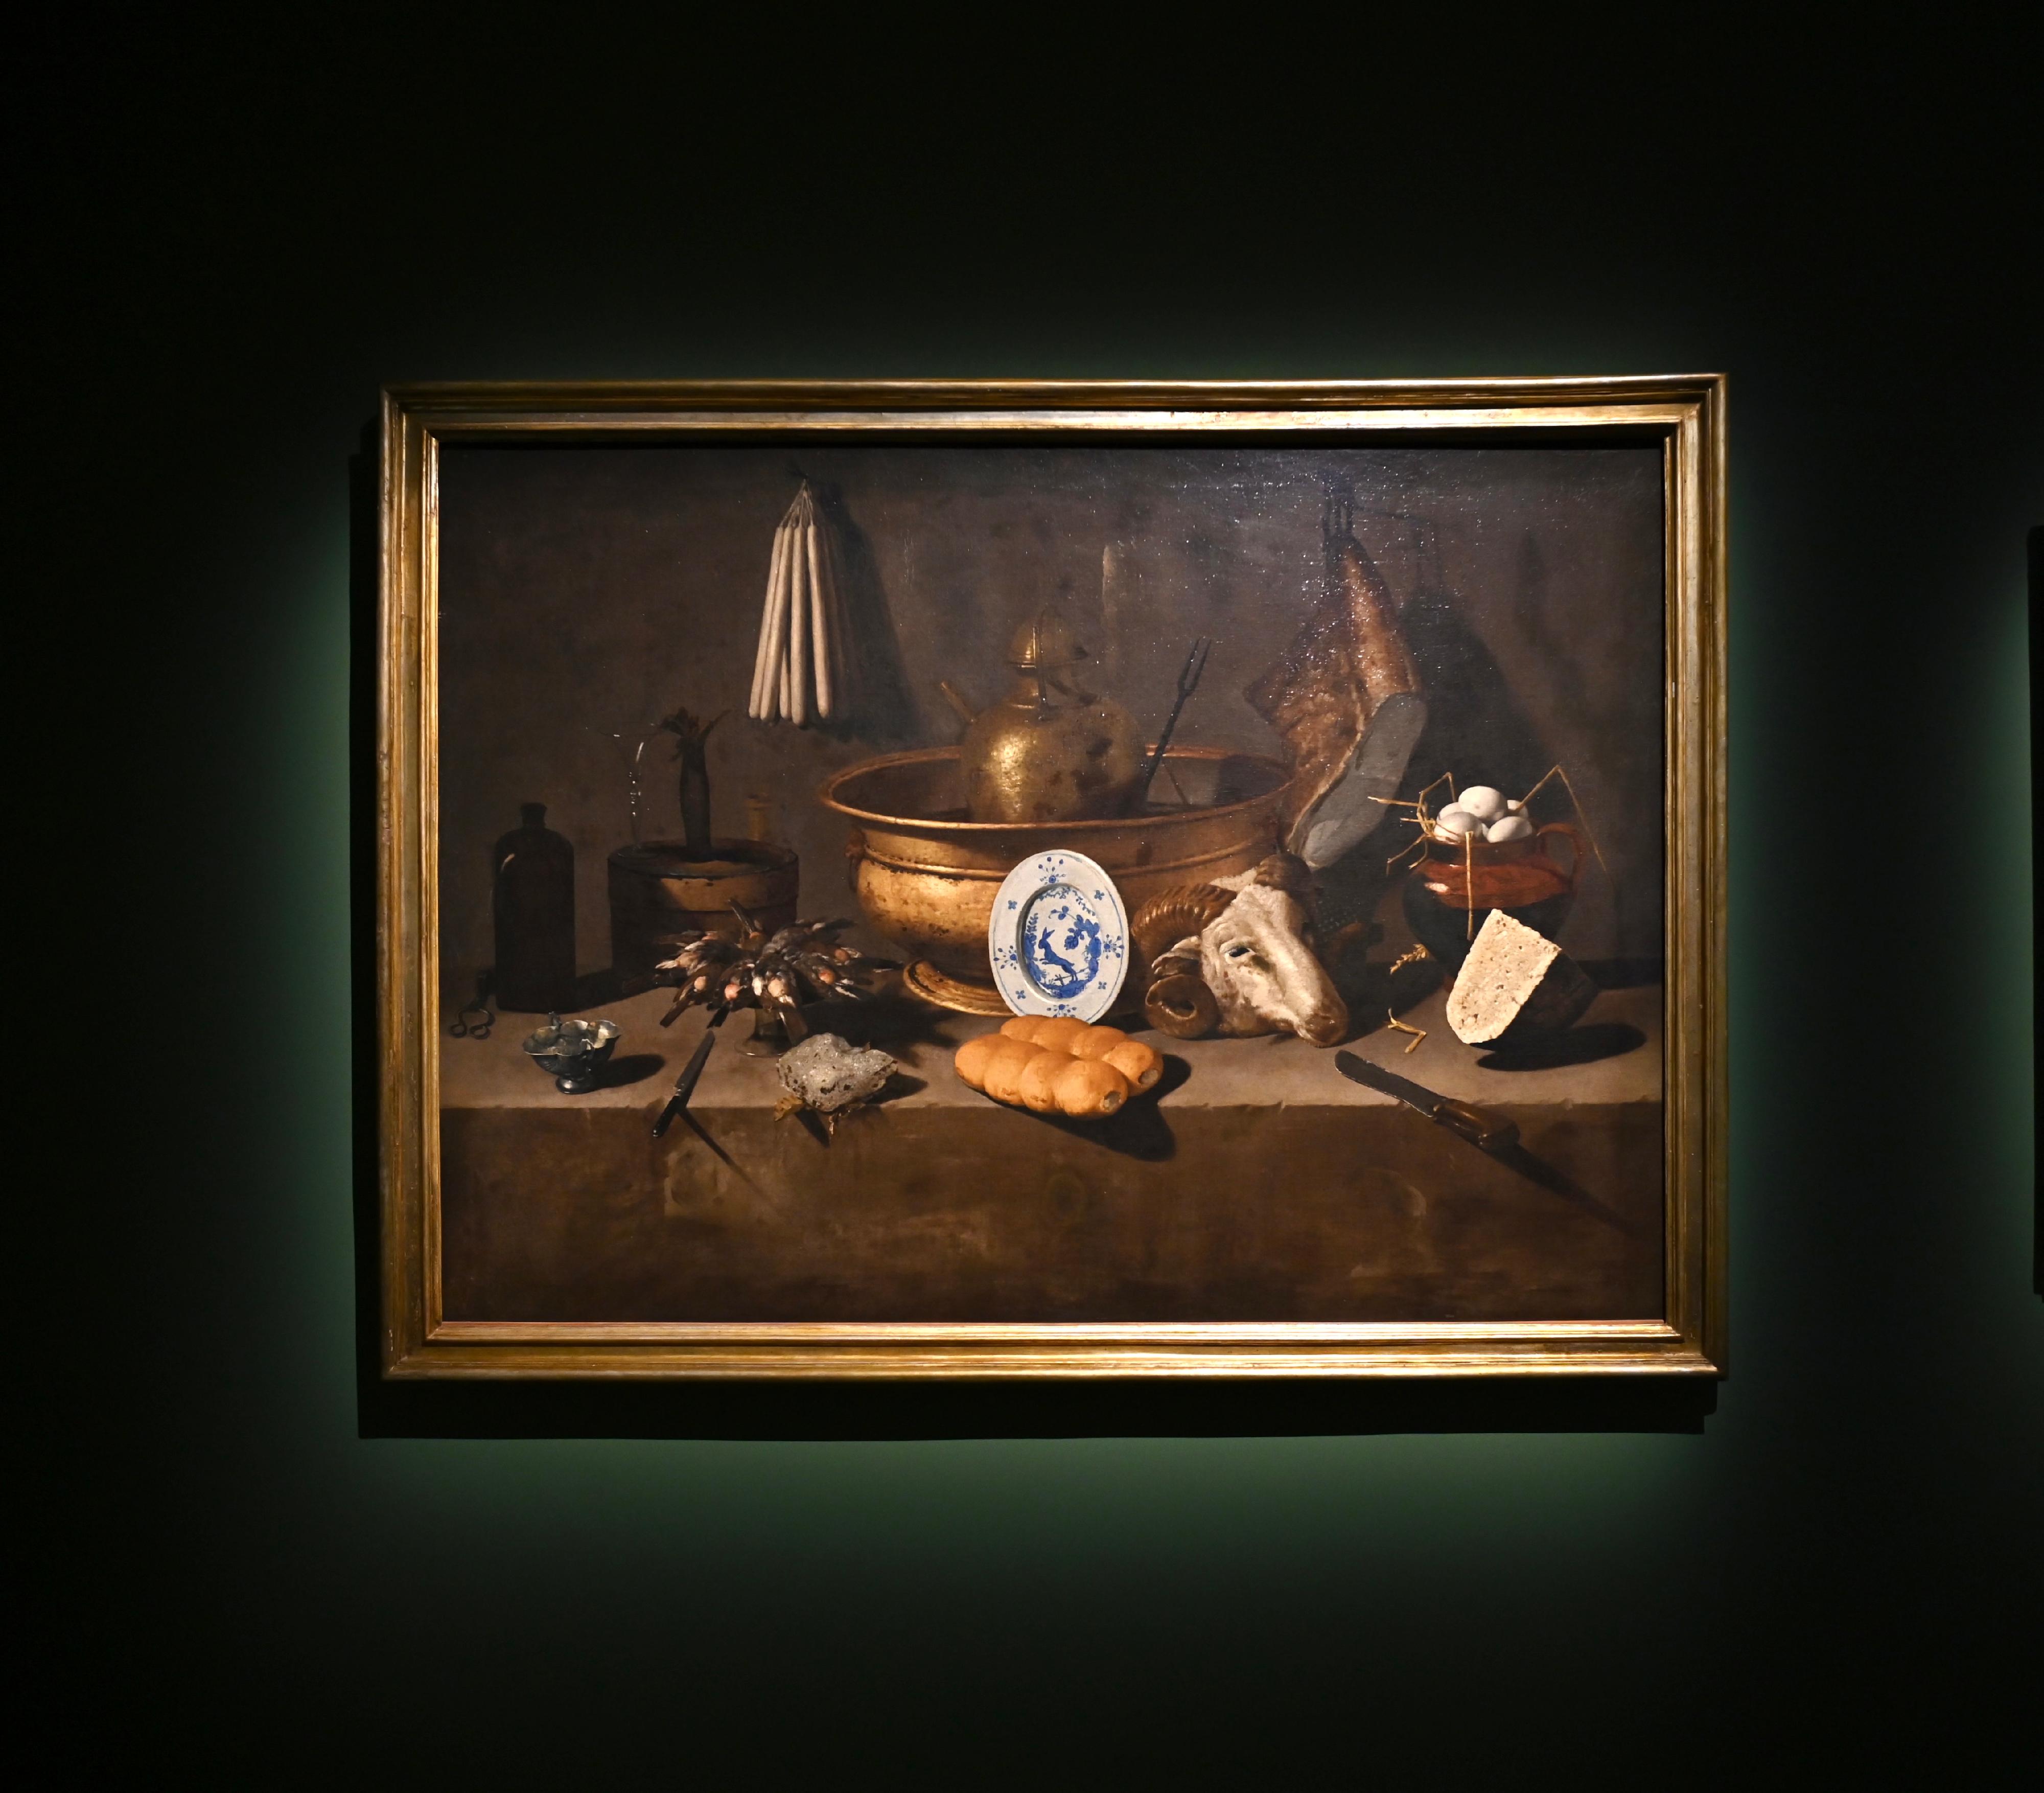 "The Hong Kong Jockey Club Series: The Road to the Baroque - Masterpieces from the Capodimonte Museum" exhibition will be held from tomorrow (July 15) at the Hong Kong Museum of Art. Picture shows Giovan Battista Recco's "Still Life with Head of a Goat". 